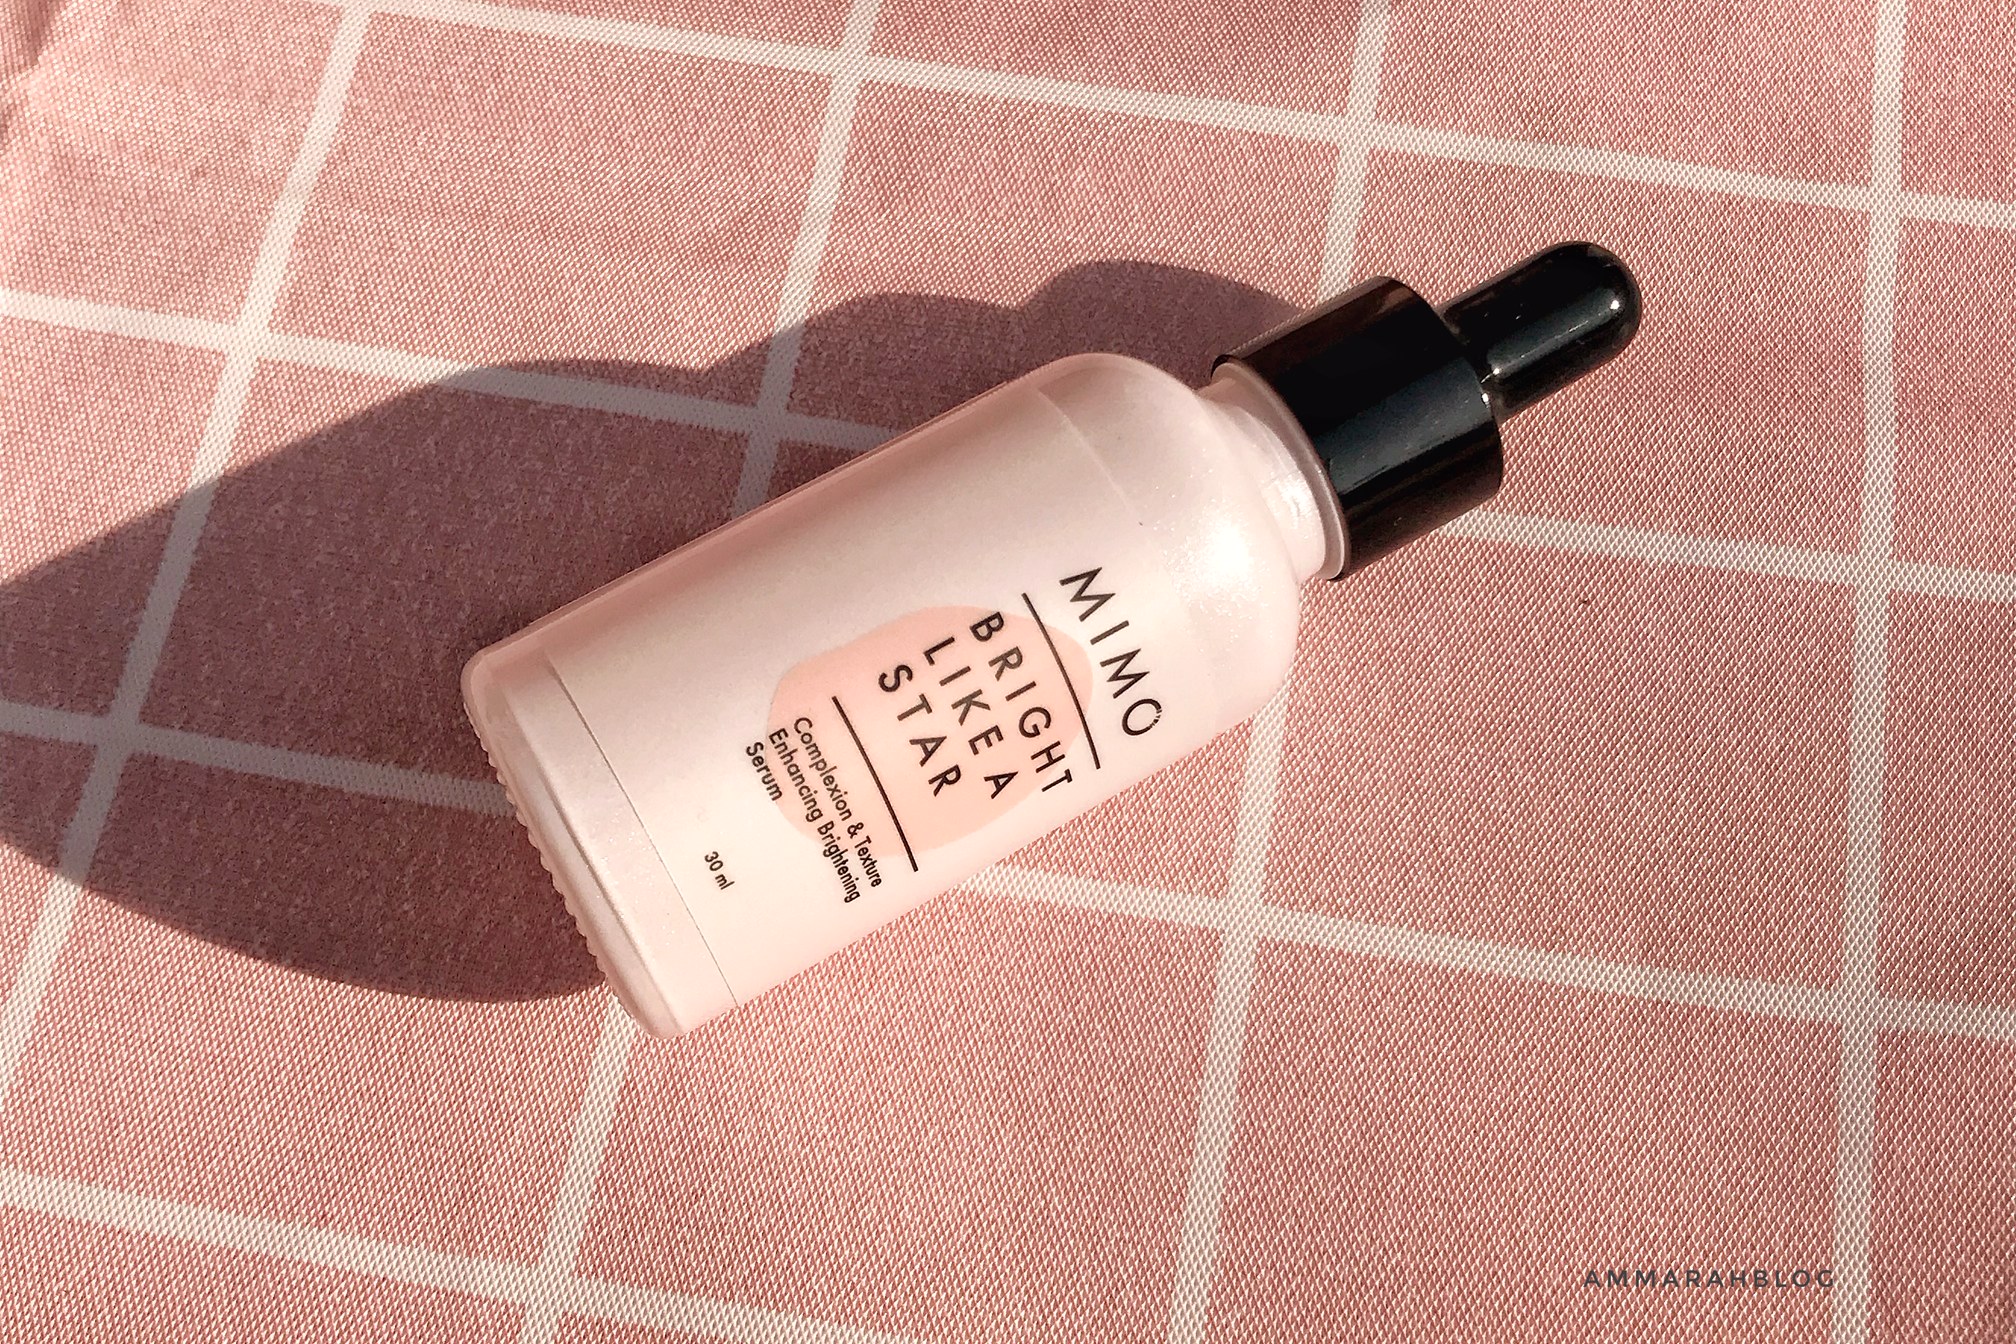 Ammarahblog: Review: Mimo By M Bright Like A Star Skincare